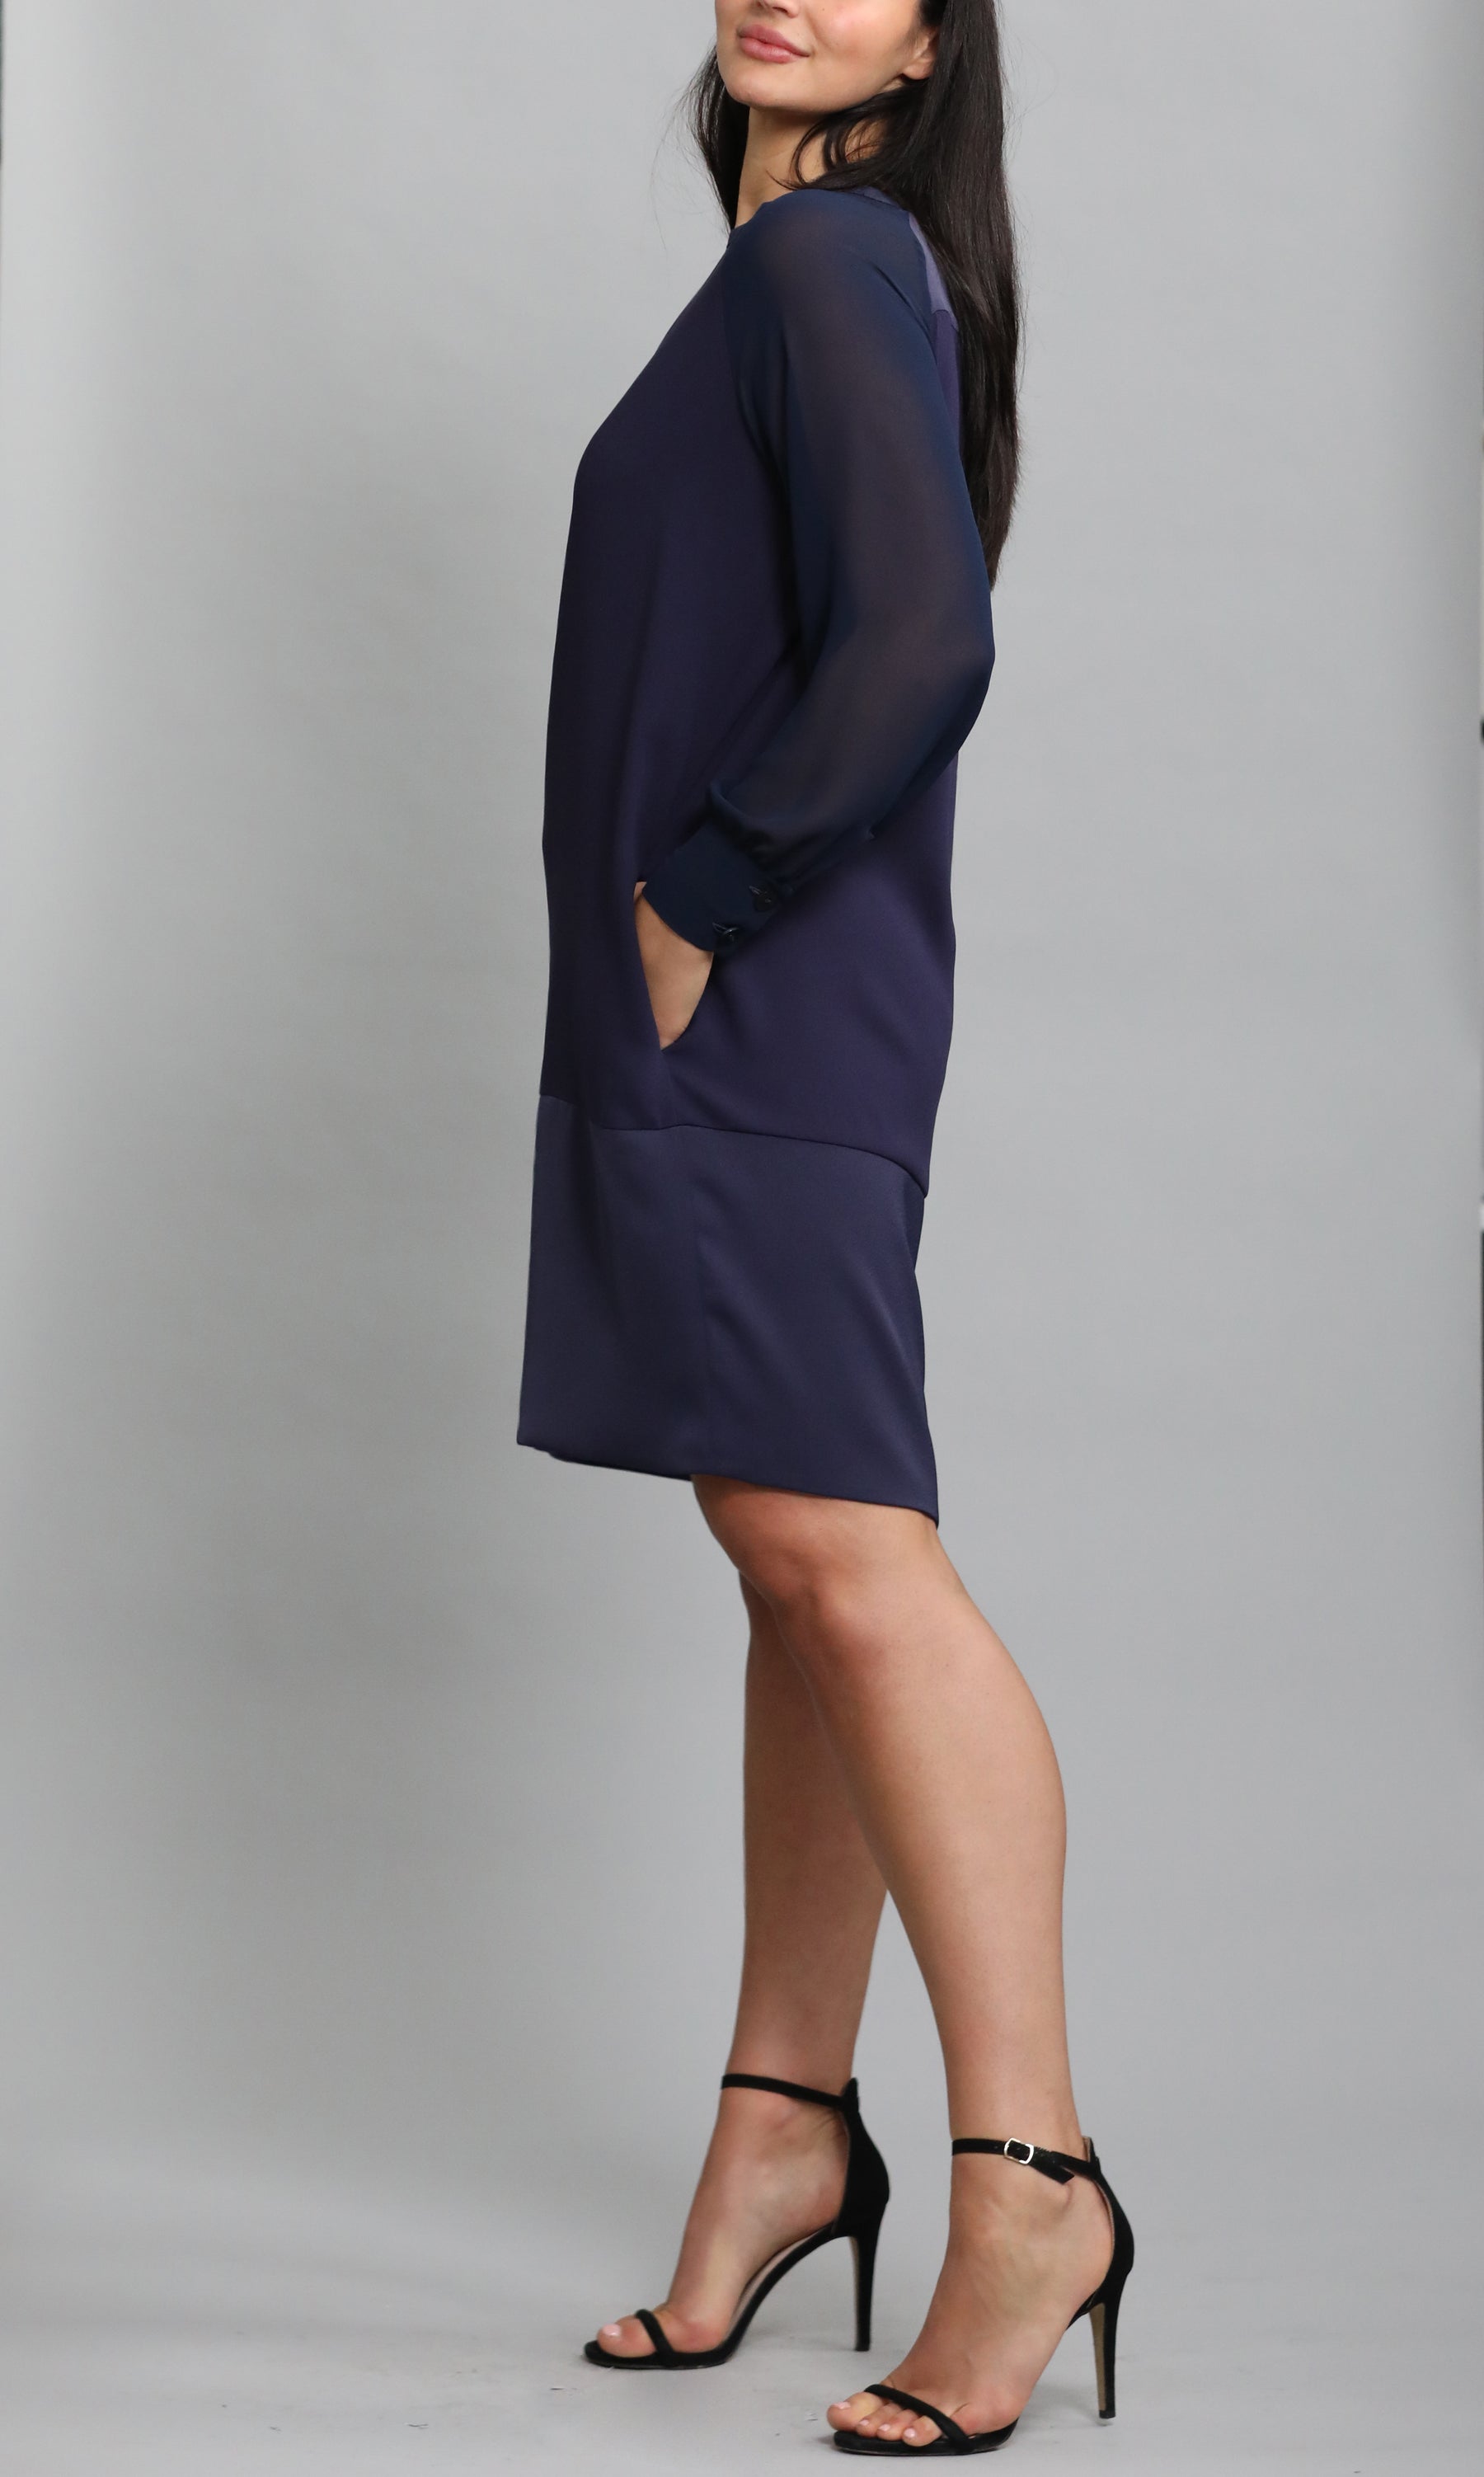 Navy Dress With Sheer Sleeves